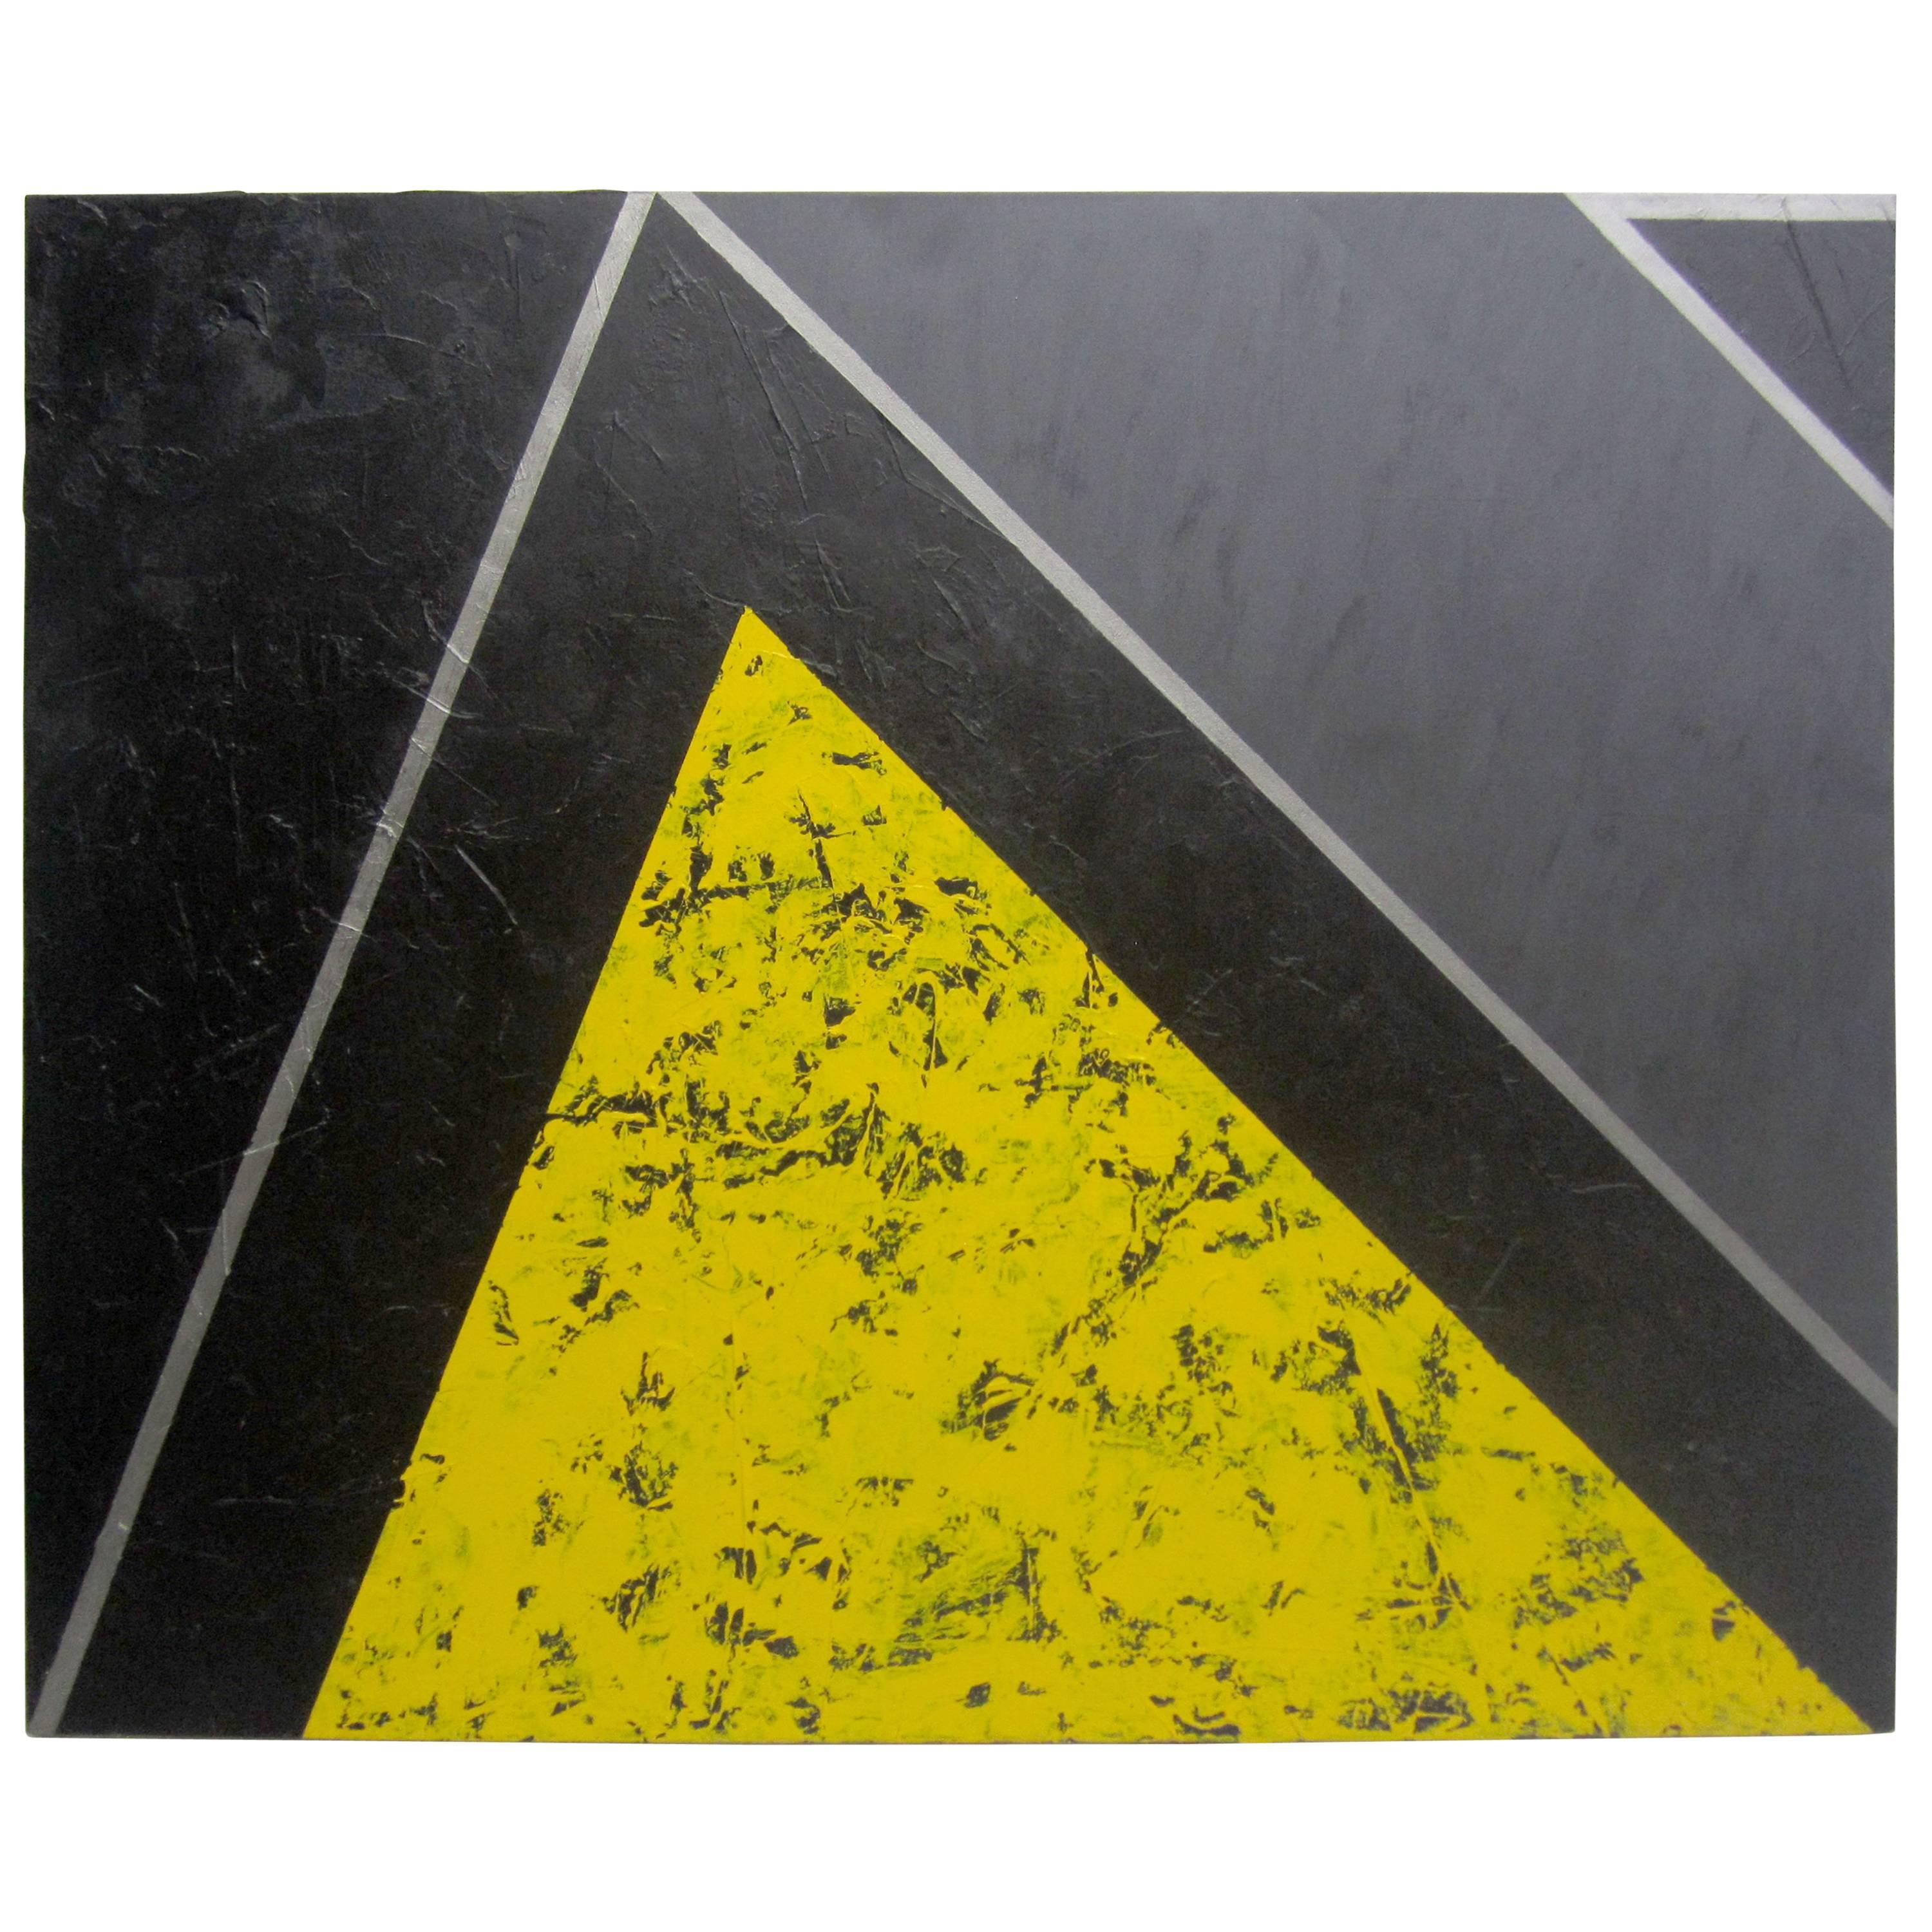 Yellow, Black and Silver Painting "The Mountain" by Gerald Campbell